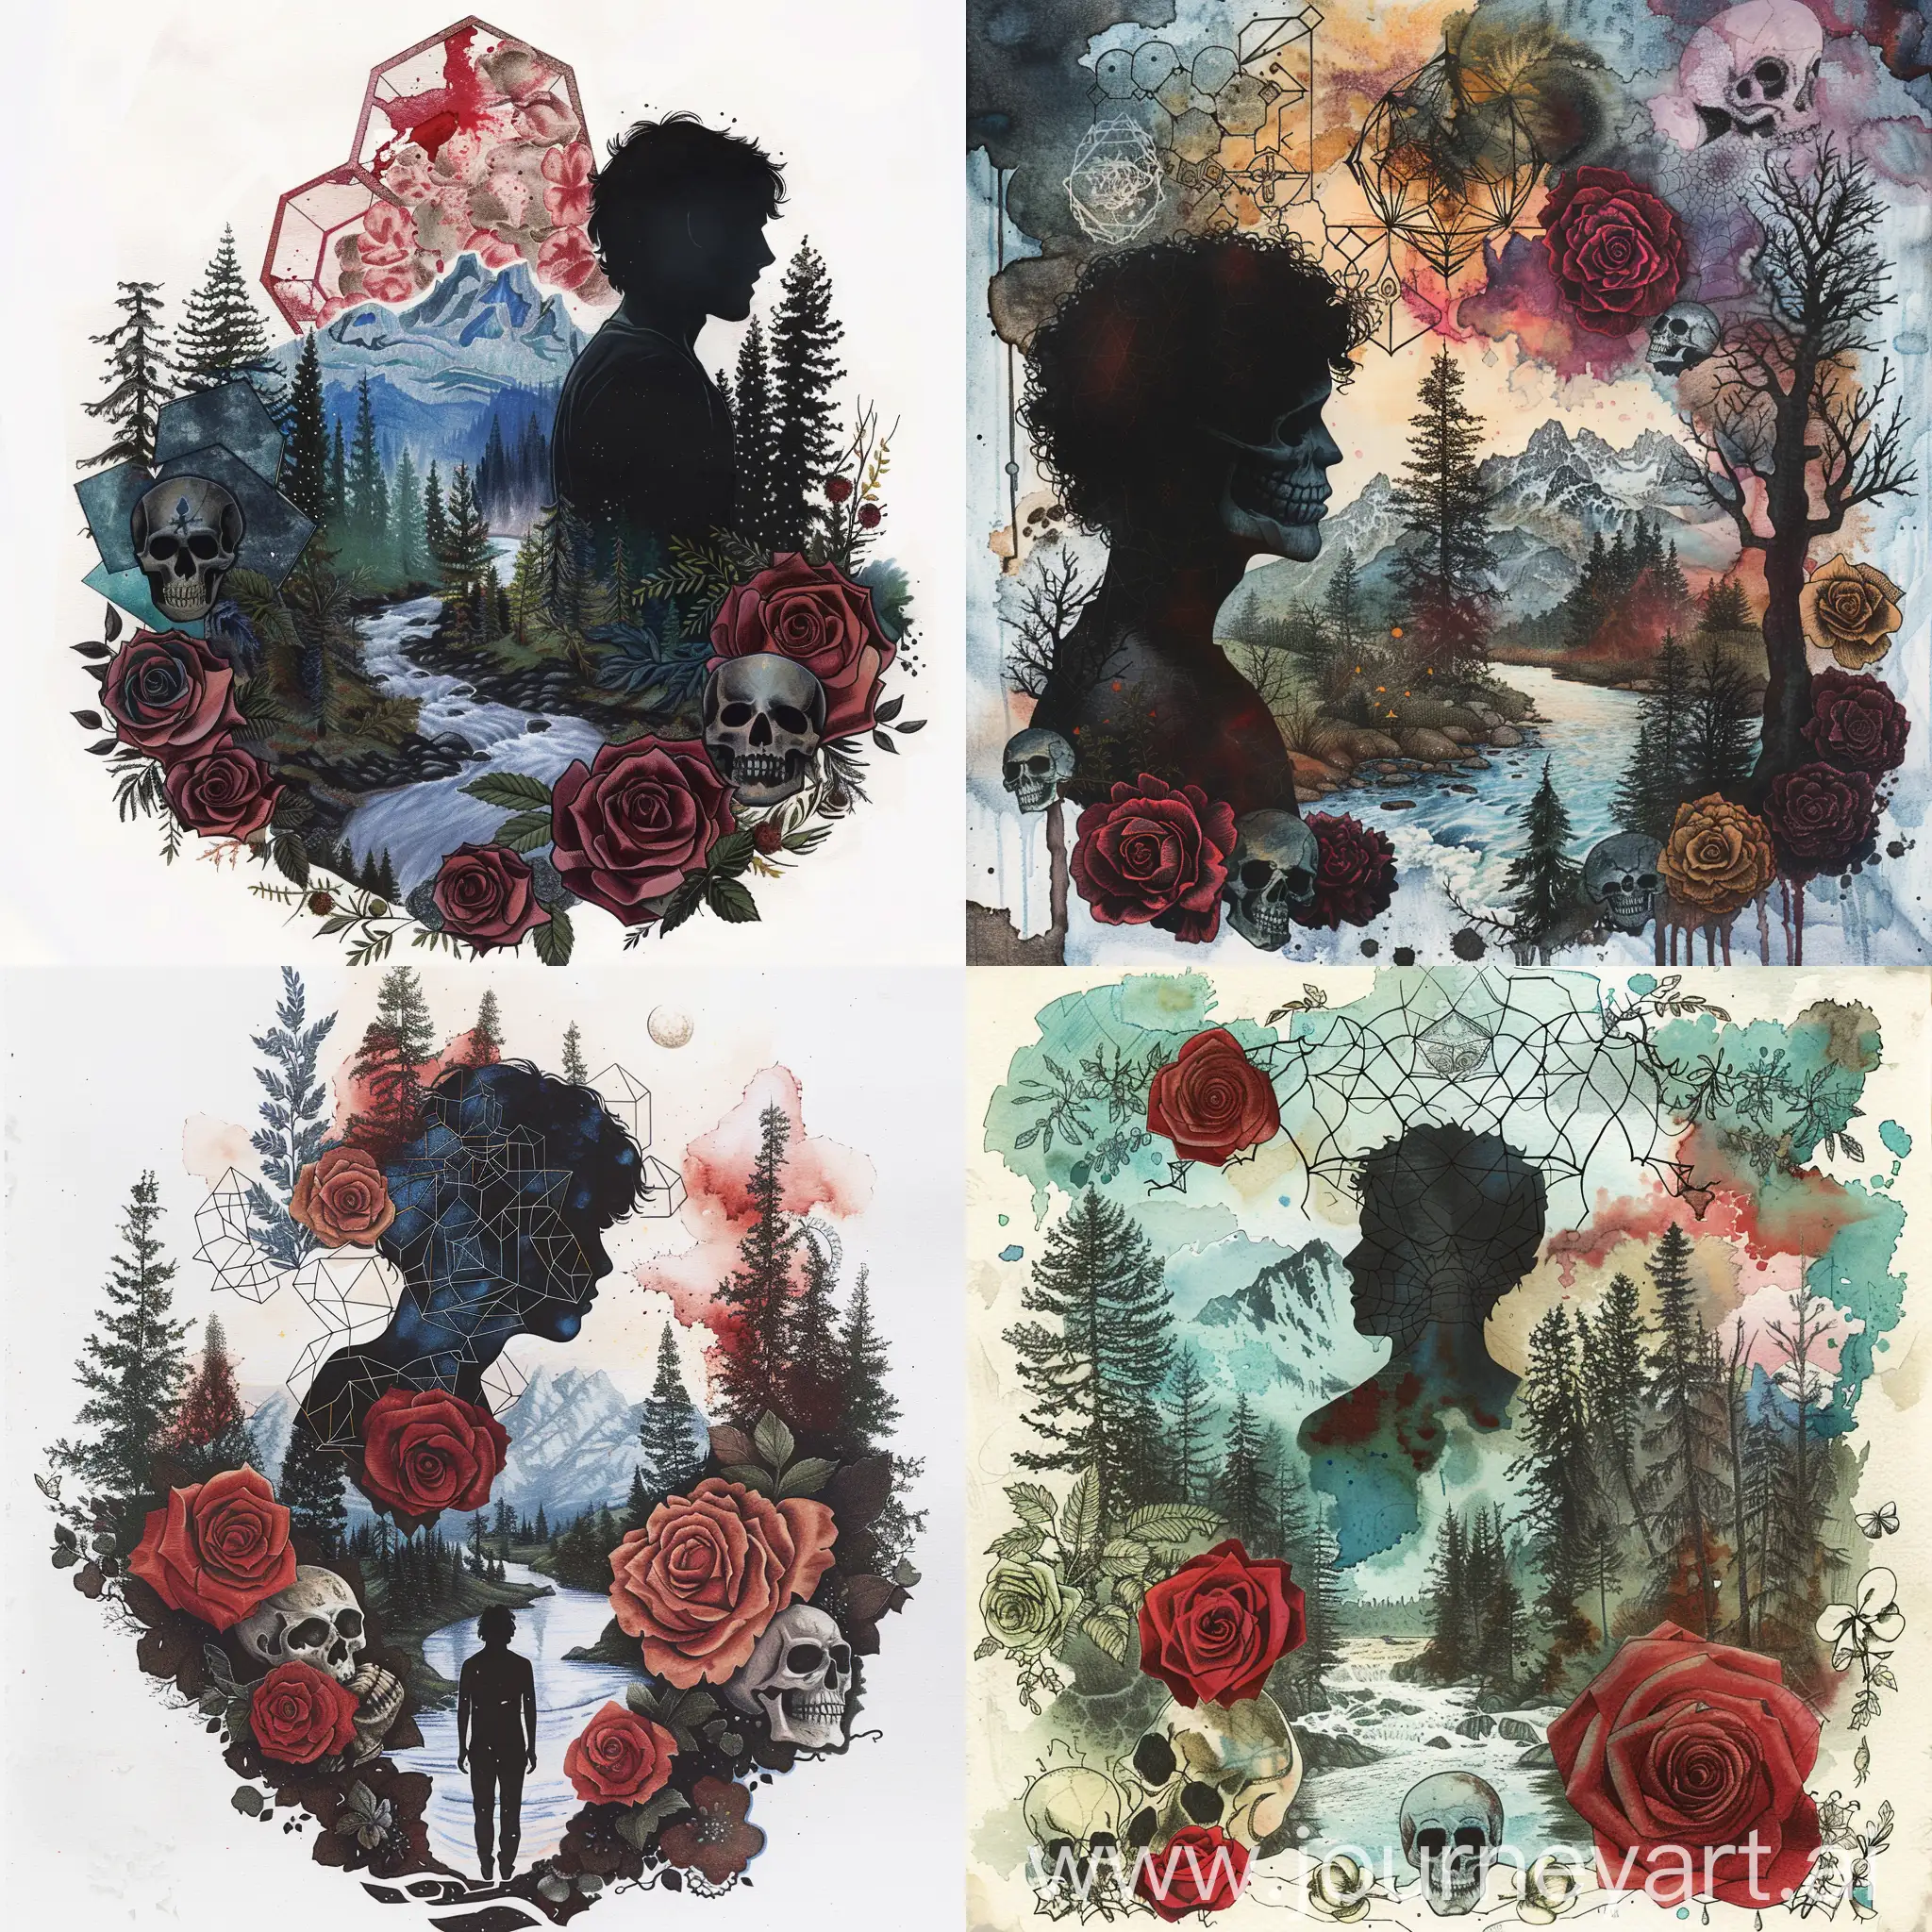 Watercolor and pencil technique, a collage of roses, skulls, intricate geometric shapes and final fantasy play, silhouette of a young man with trees, with river and mountains in the background. Use an illustrated style.